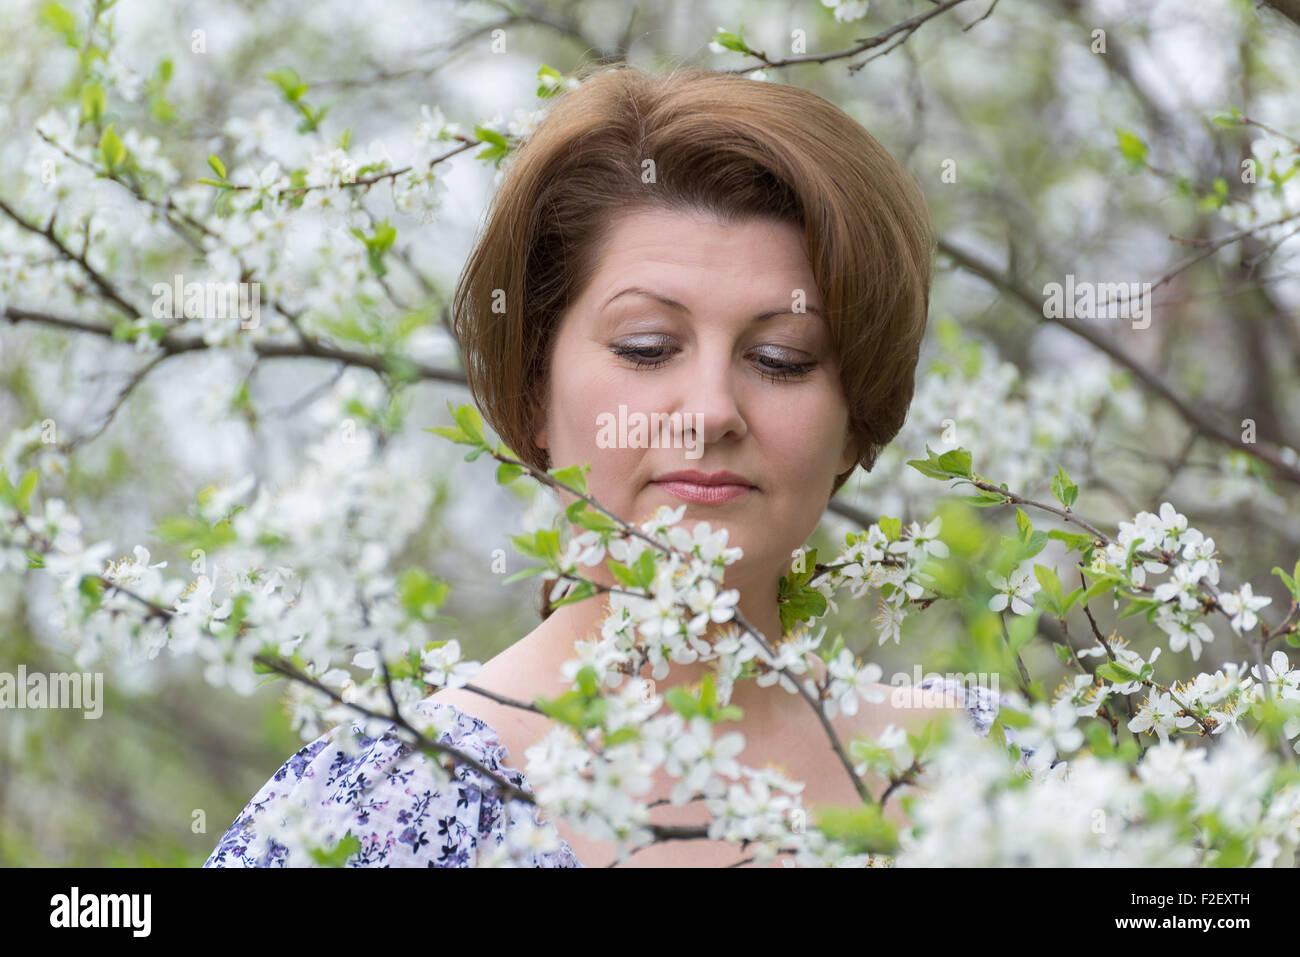 Woman with allergic rhinitis in the spring garden Stock Photo